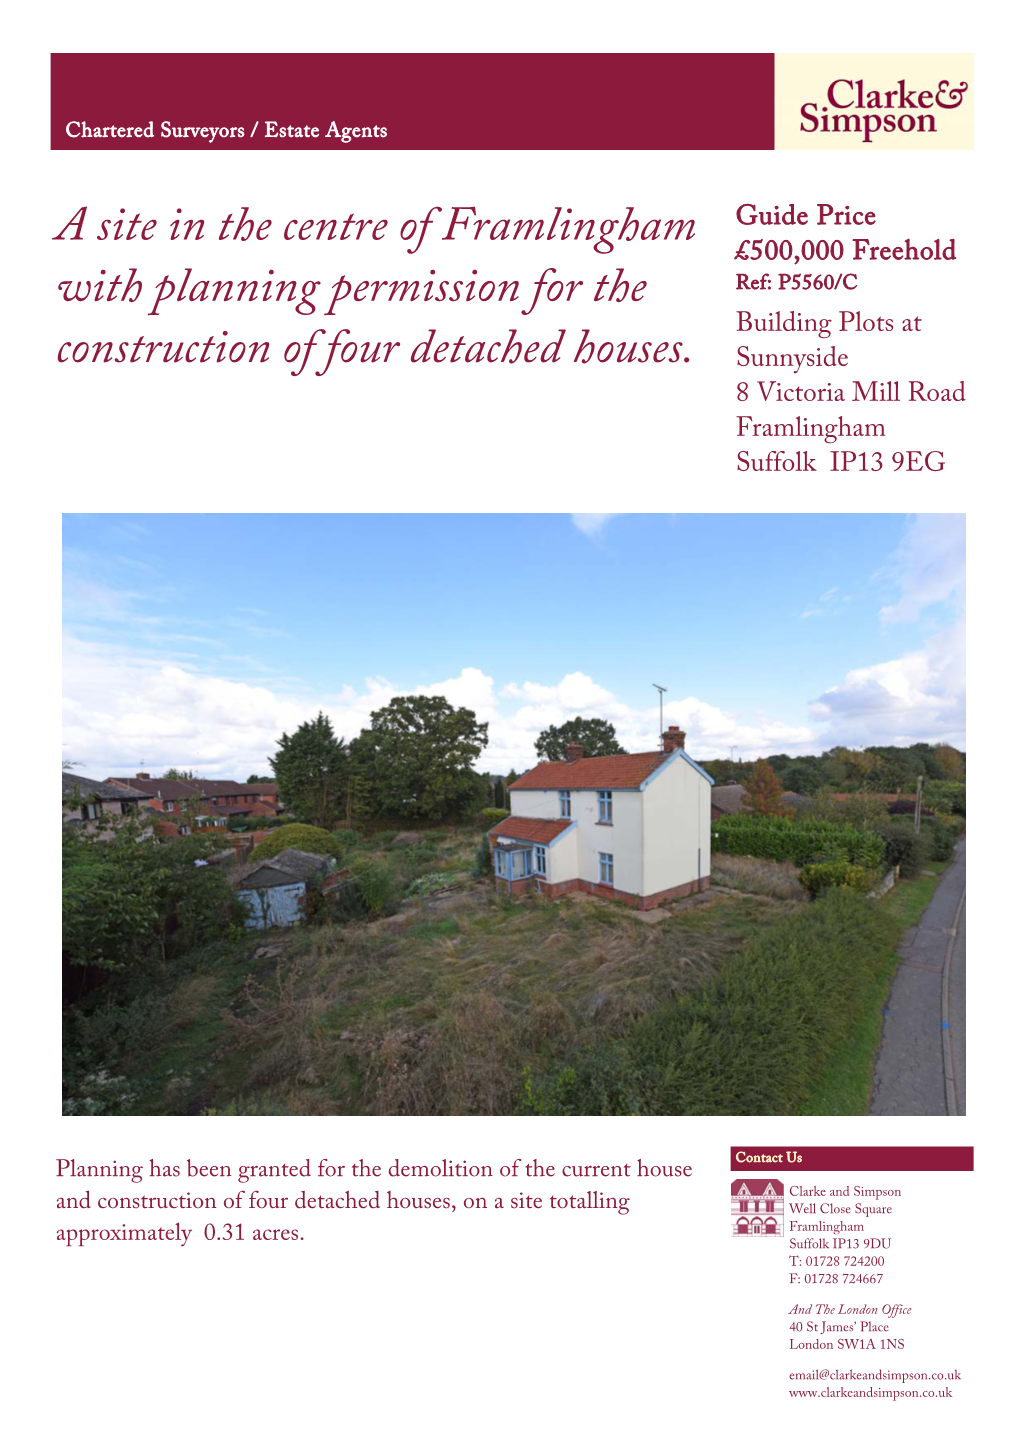 A Site in the Centre of Framlingham with Planning Permission for The